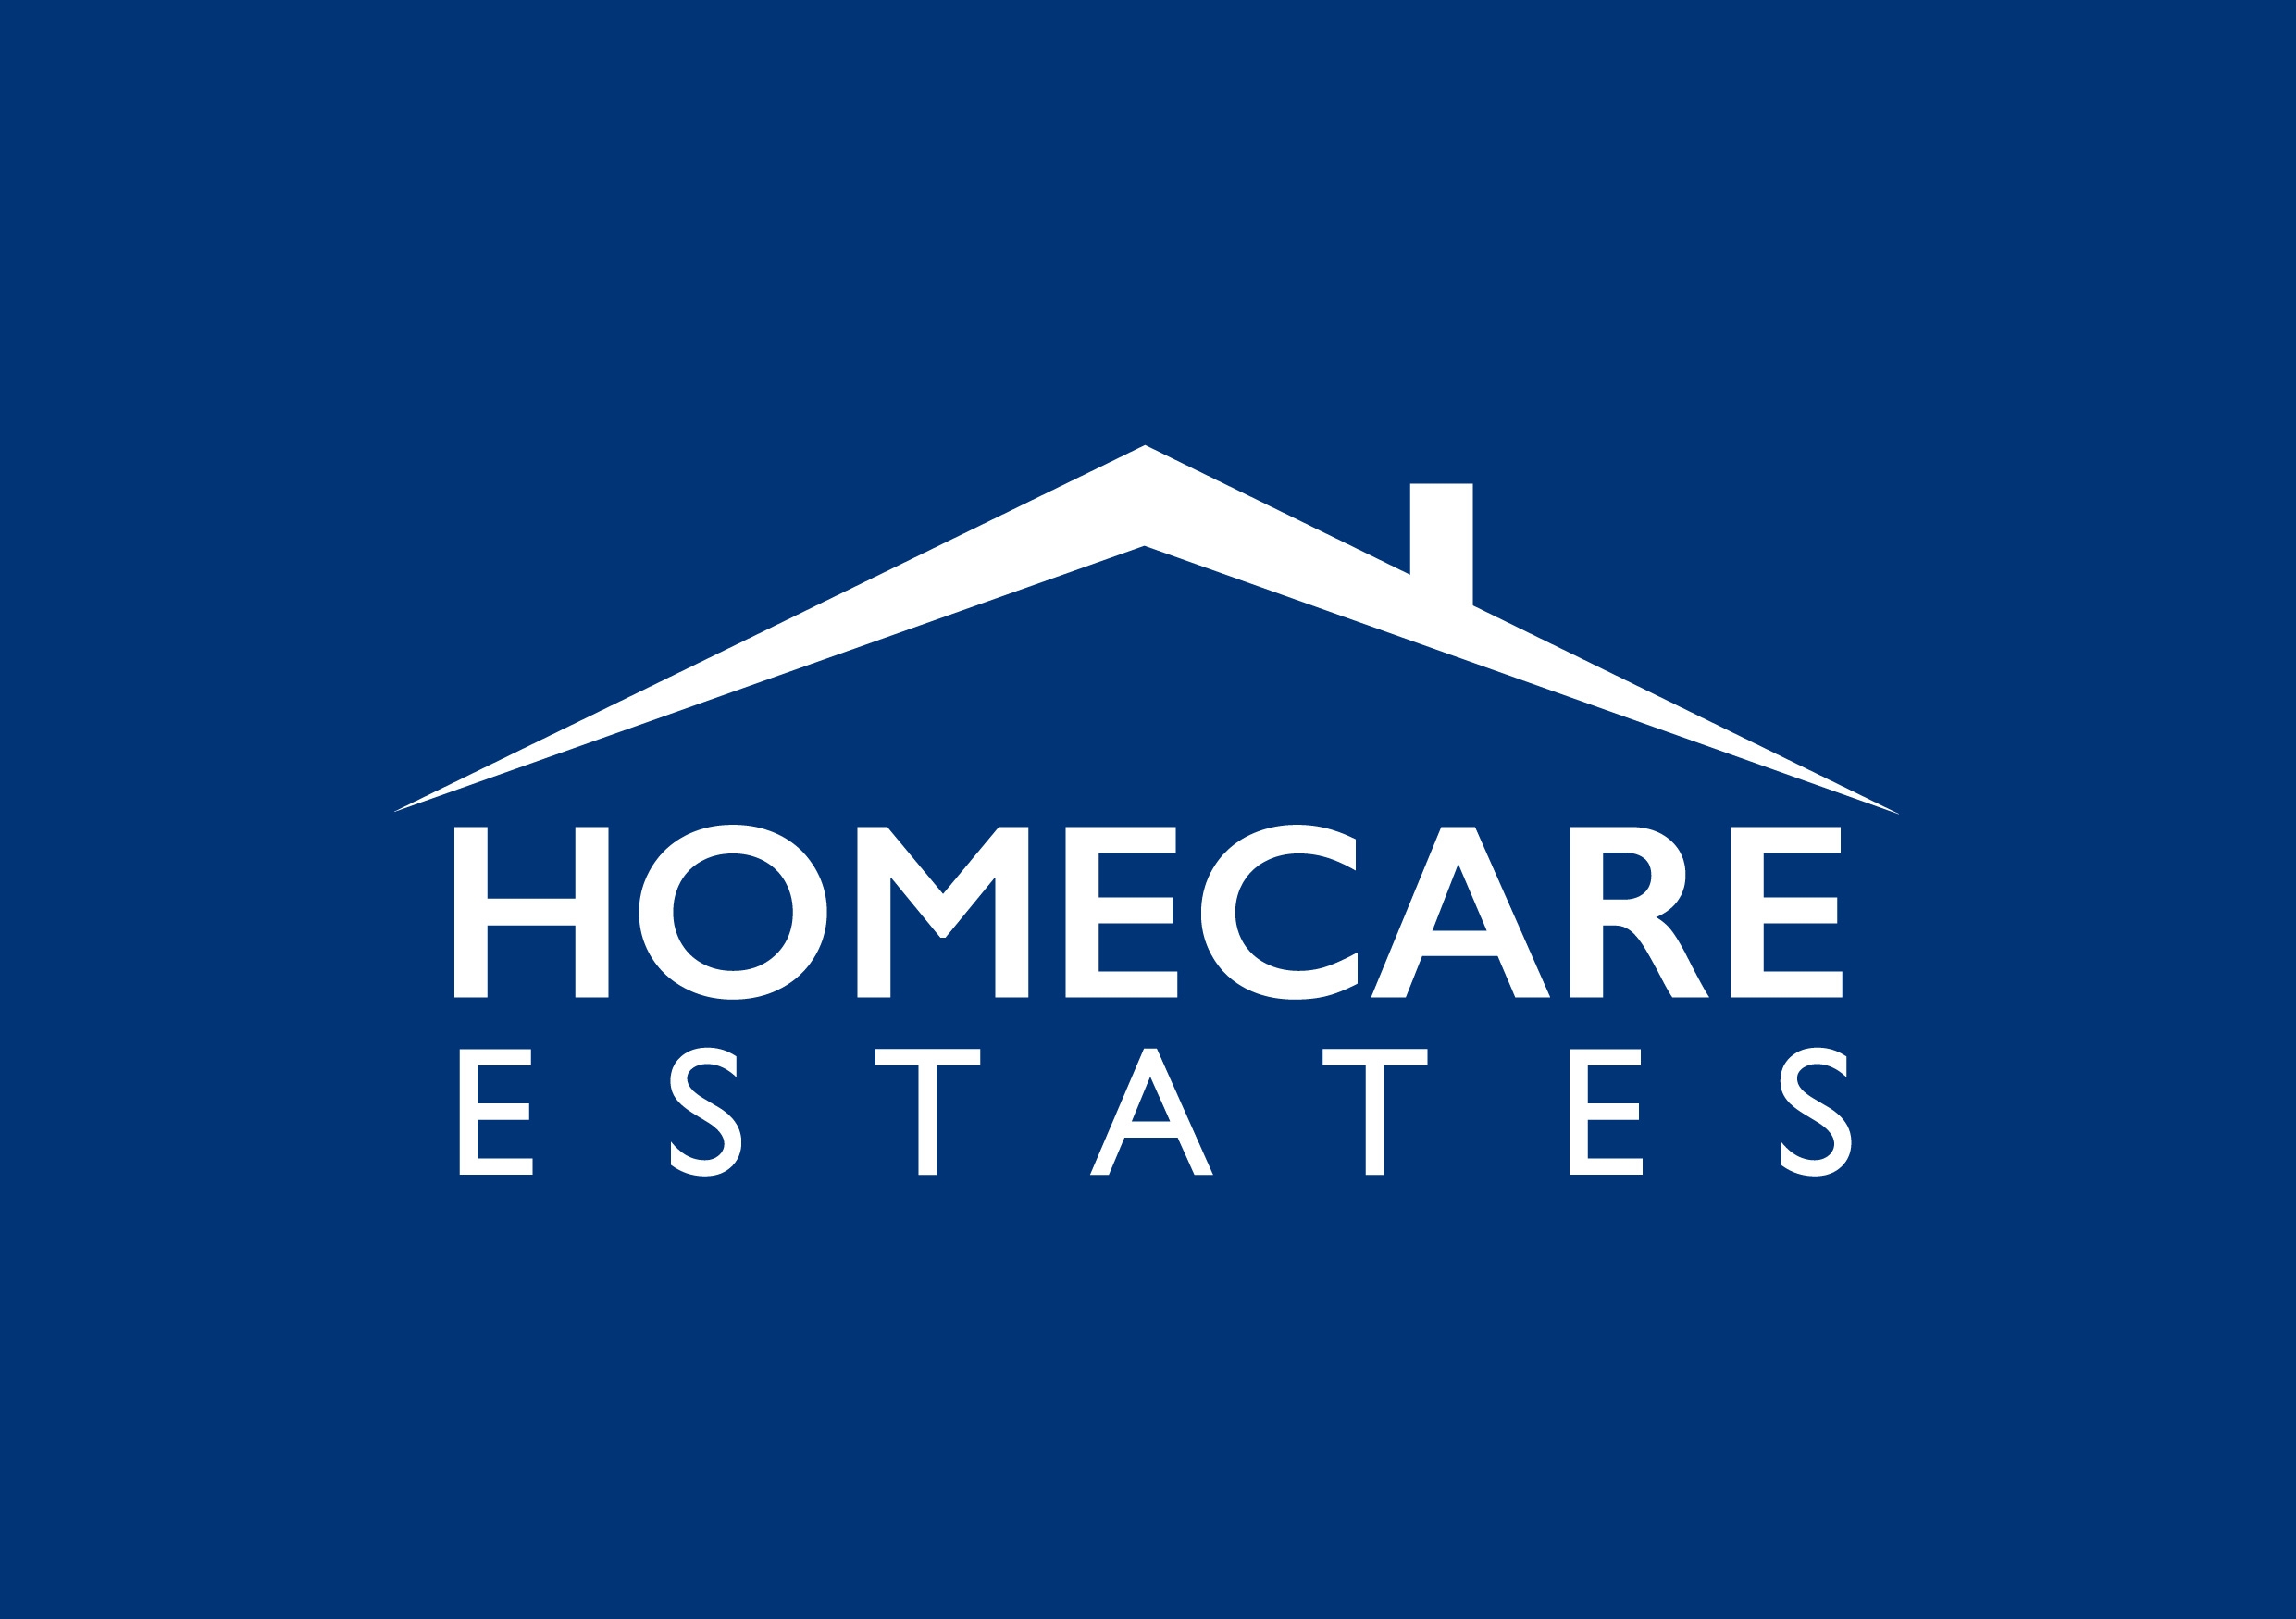 Homecare Estates- Sales and Lettings Agent in Wallington